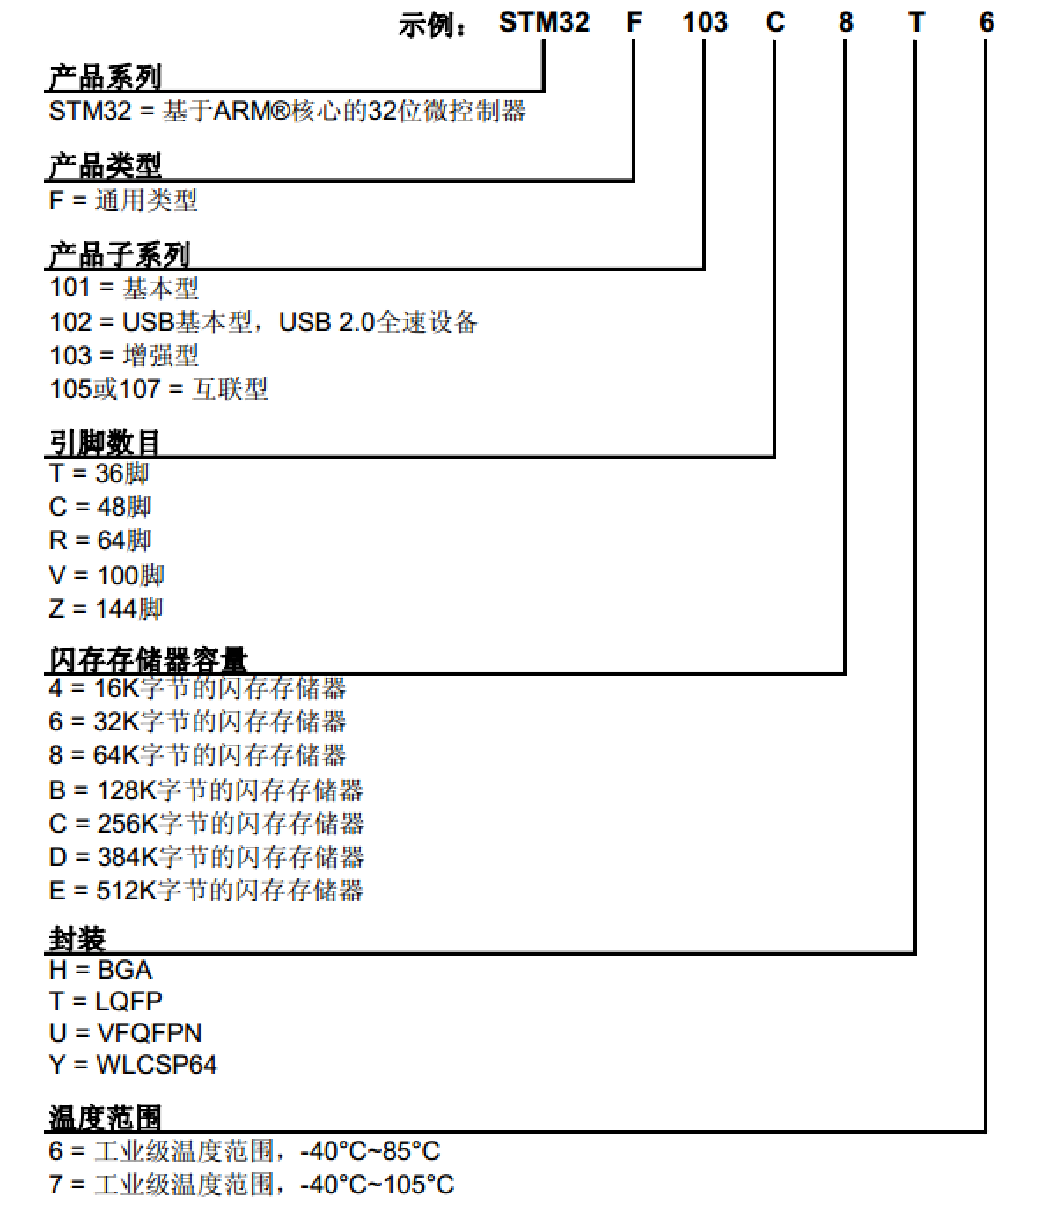 P2-STM32简介-30.png